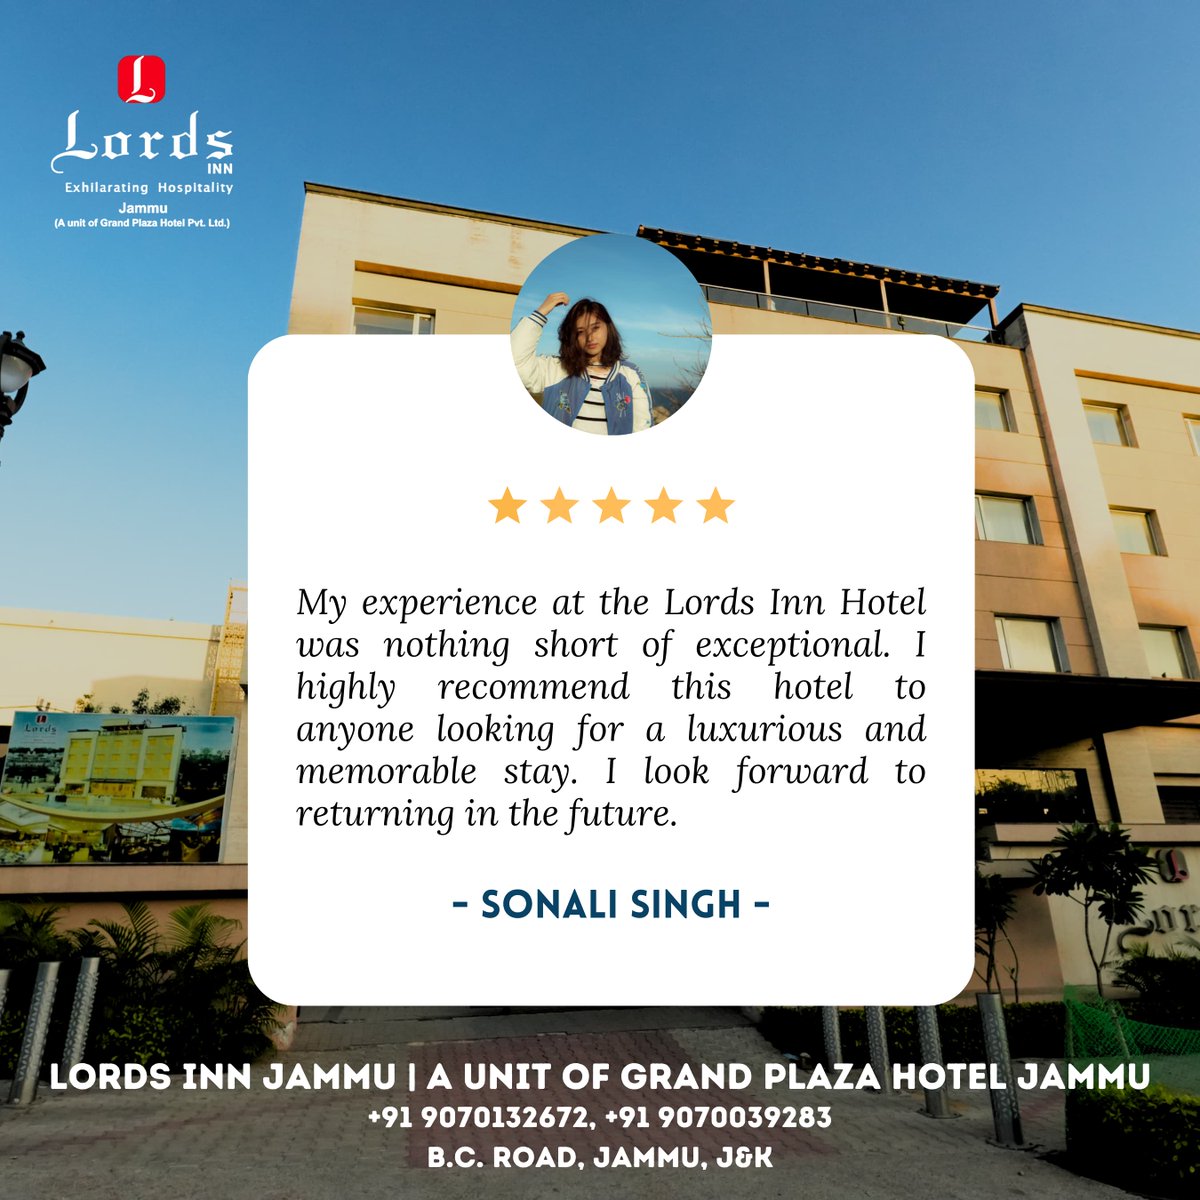 “💯 Customer Satisfaction 💯 It’s always a joy to see our guests leaving with a smile! Read what one of our happy guests had to say about their stay at Lords Inn Jammu.
.

#customersatisfaction #hotelreview #travelexperience #hotelstay #customerfeedback #luxuryhotel #hospitality